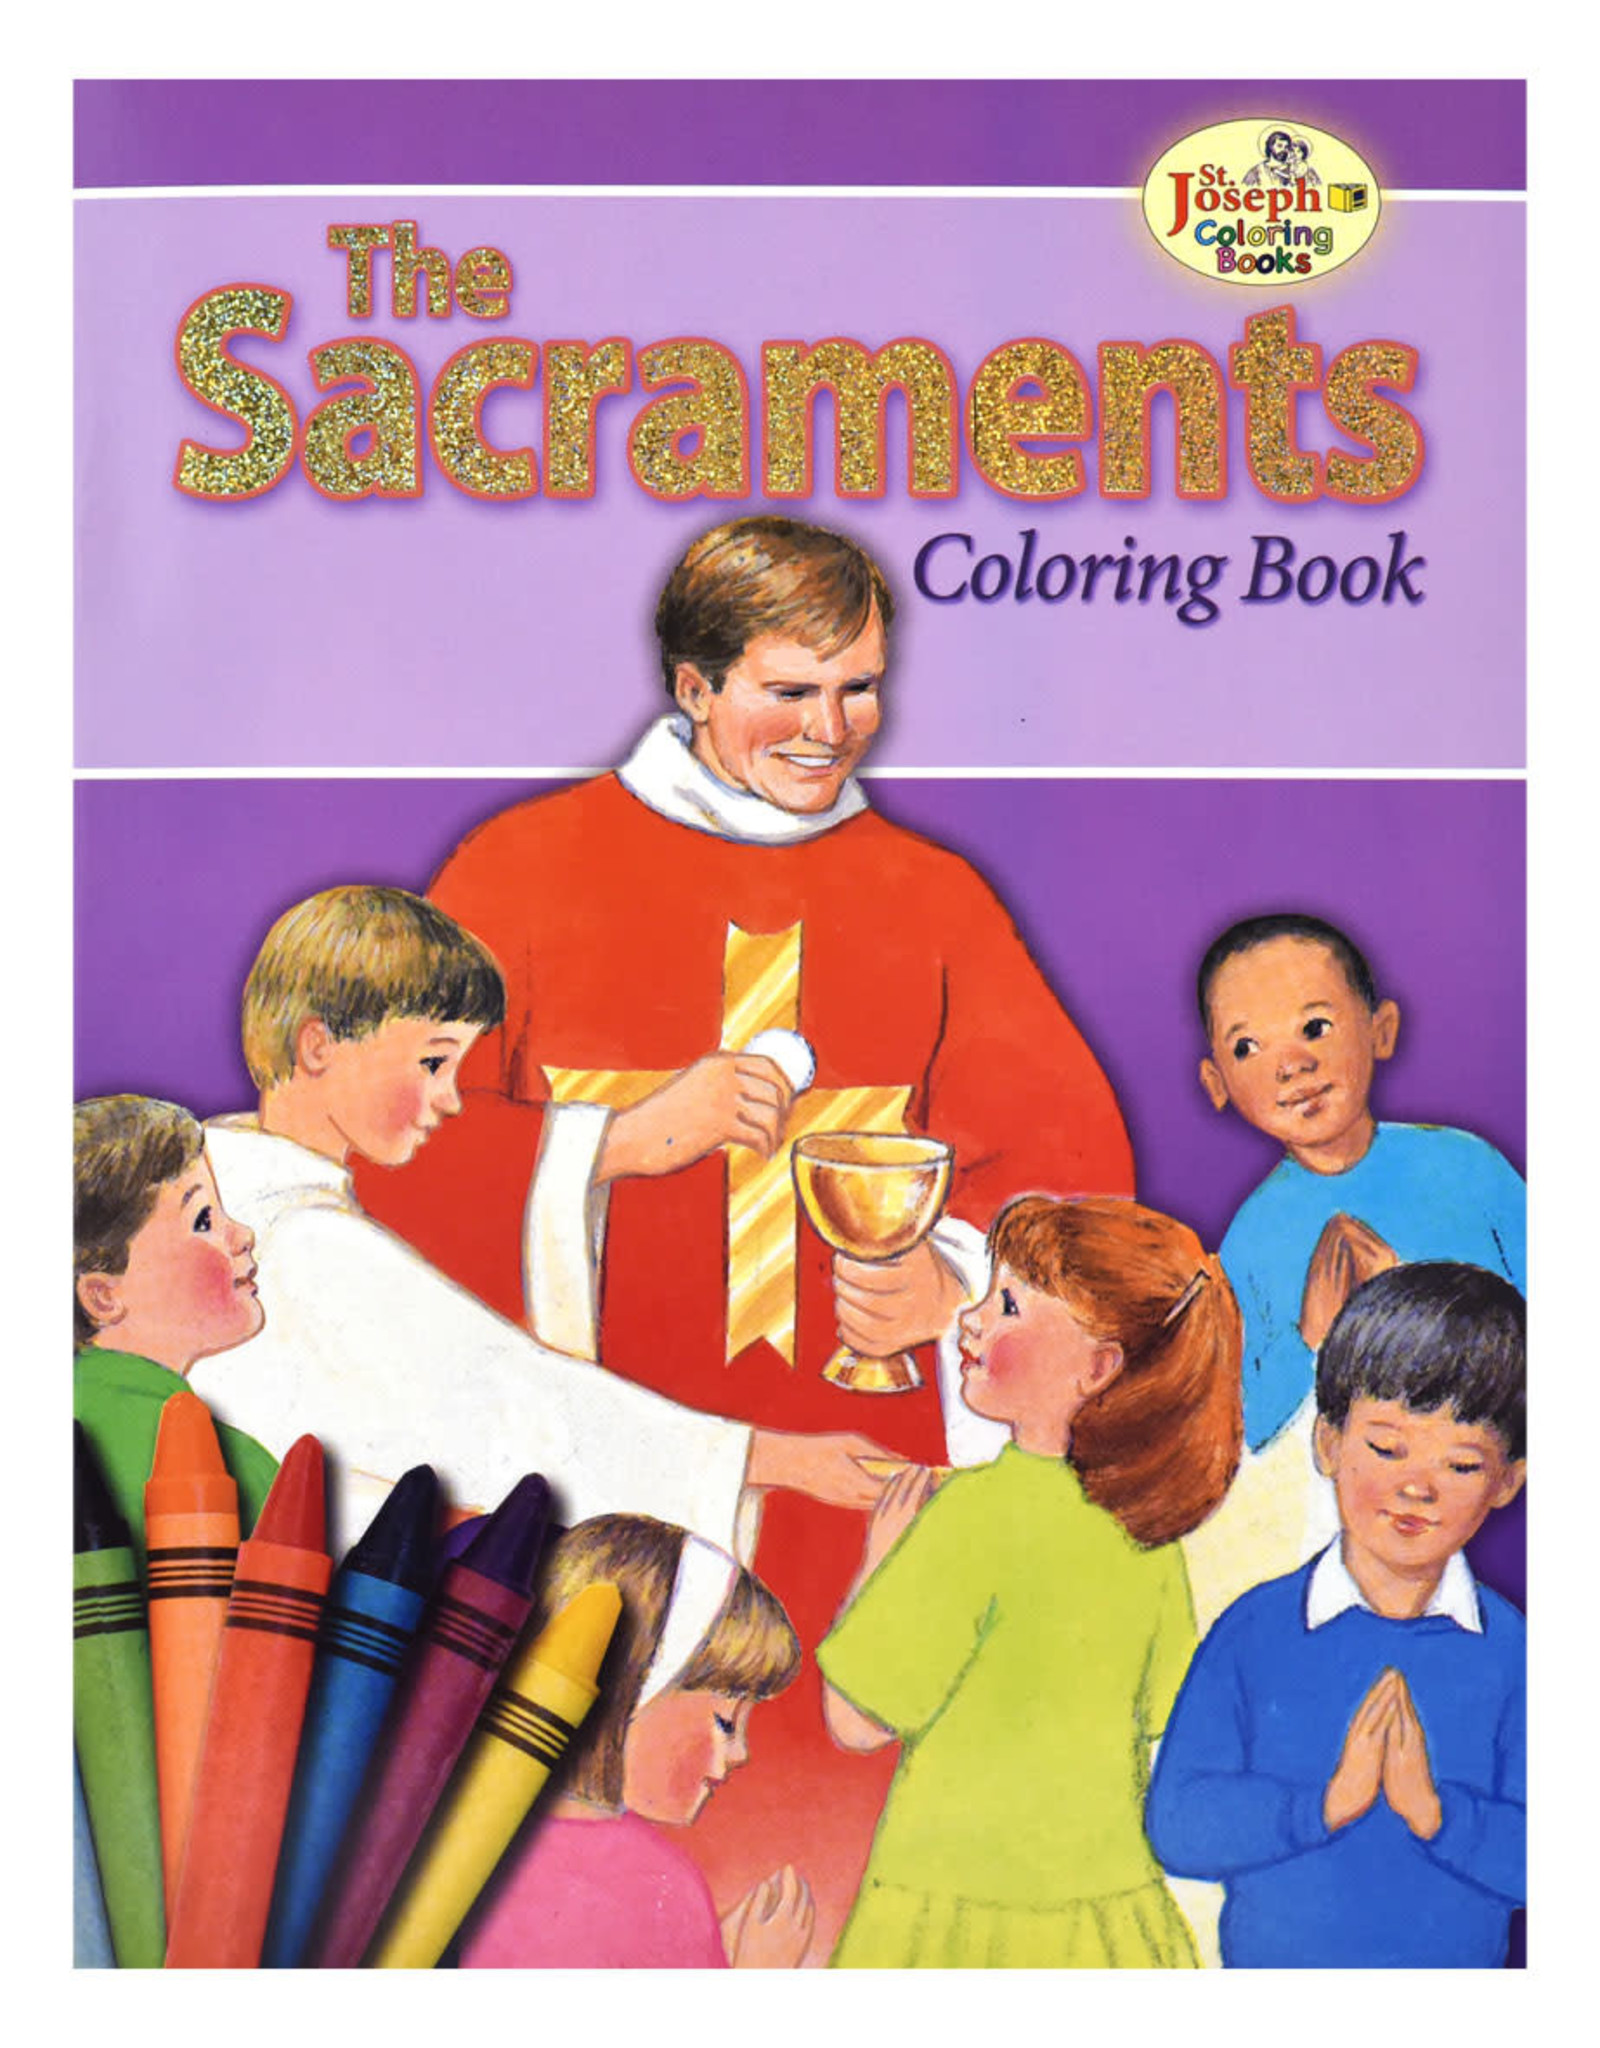 Catholic Book Publishing Coloring Book About the Sacraments (paperback)